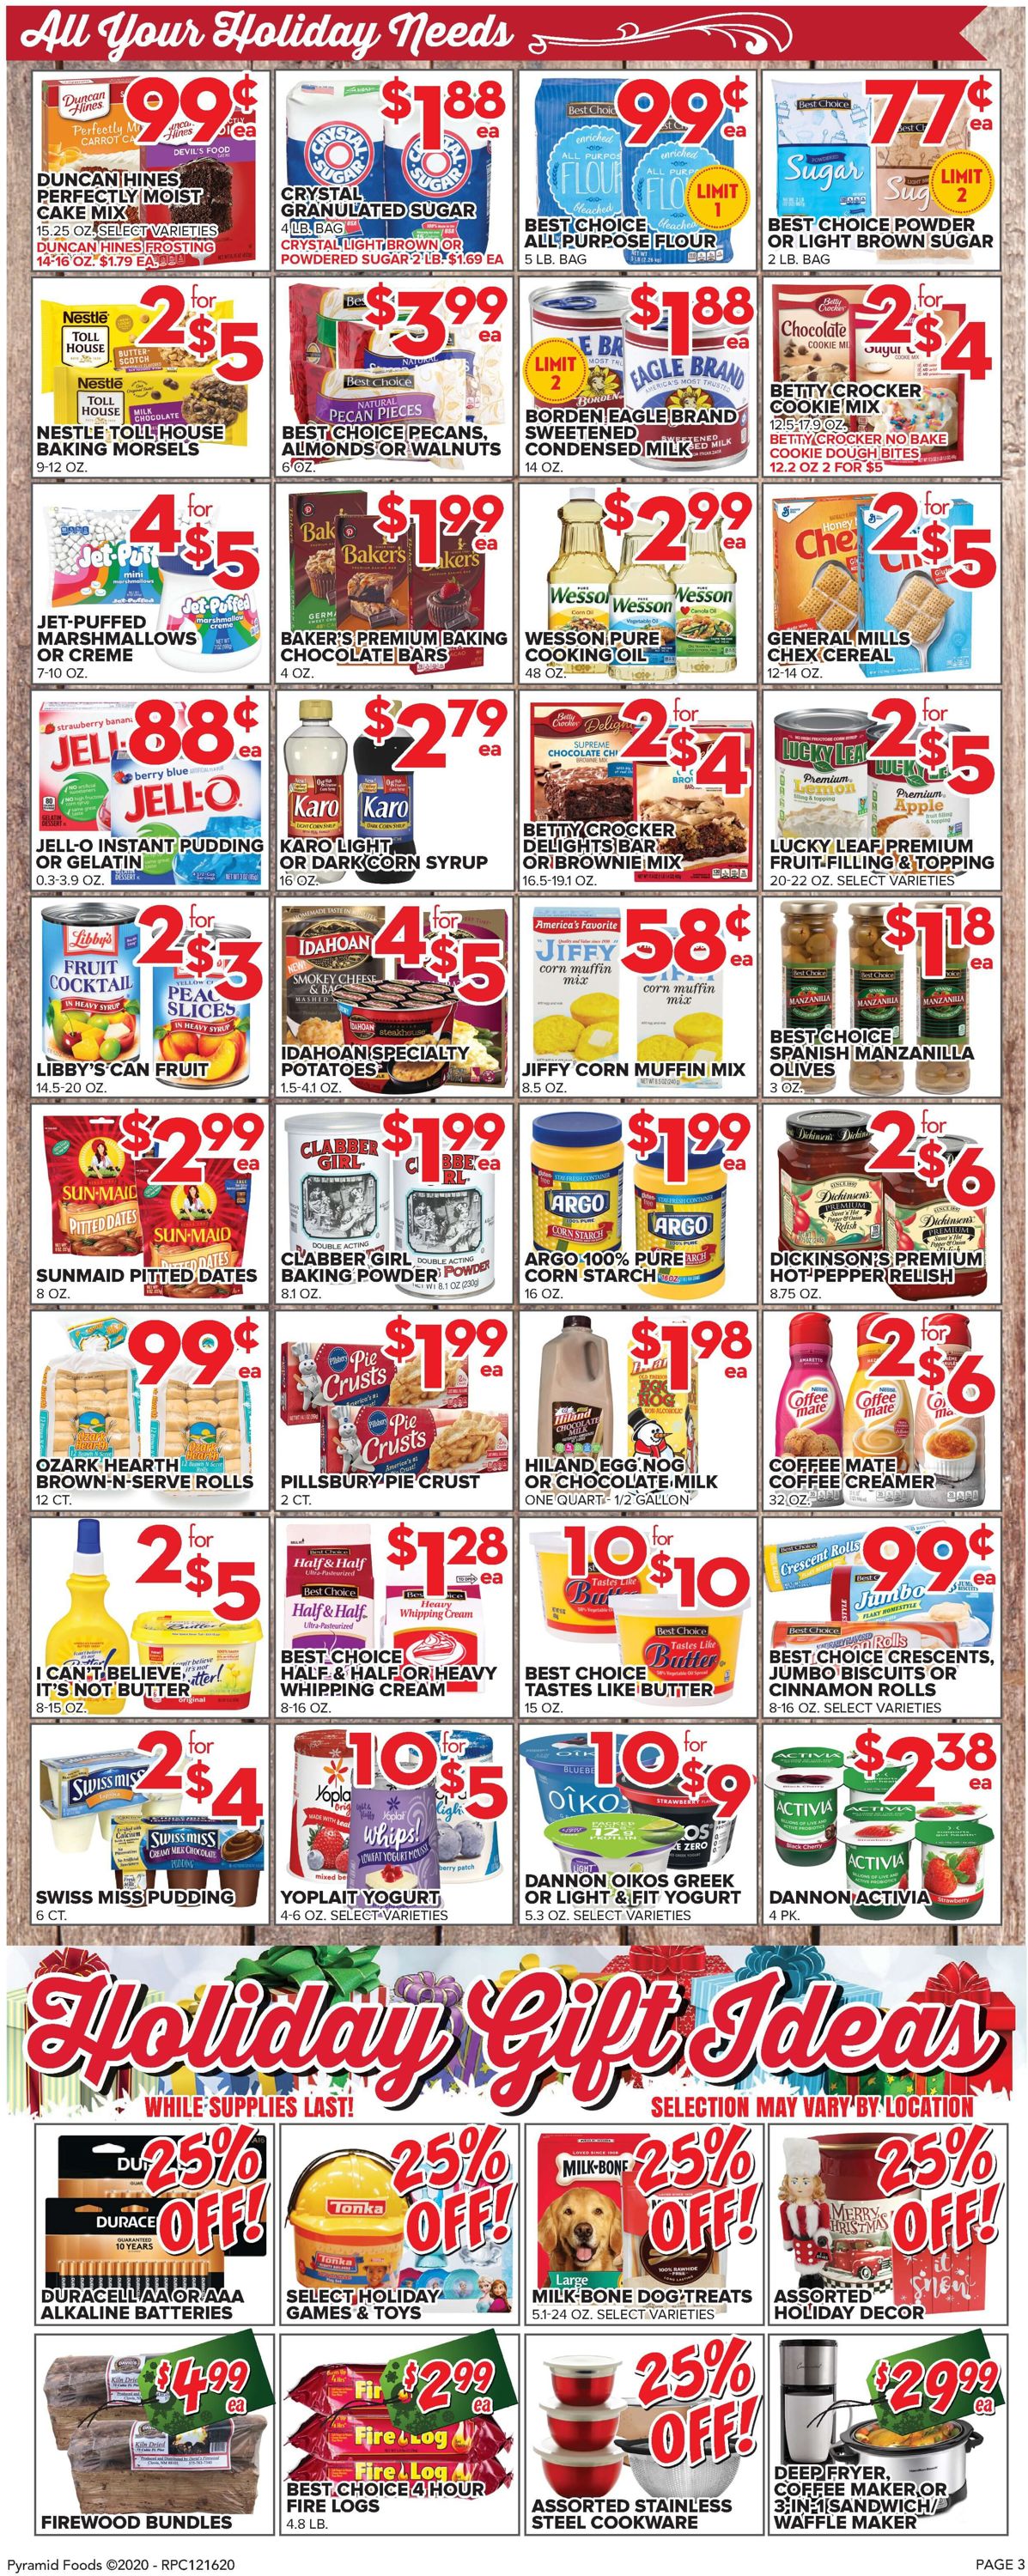 Price Cutter Christmas Ad 2020 Weekly Ad Circular - valid 12/16-12/25/2020 (Page 5)